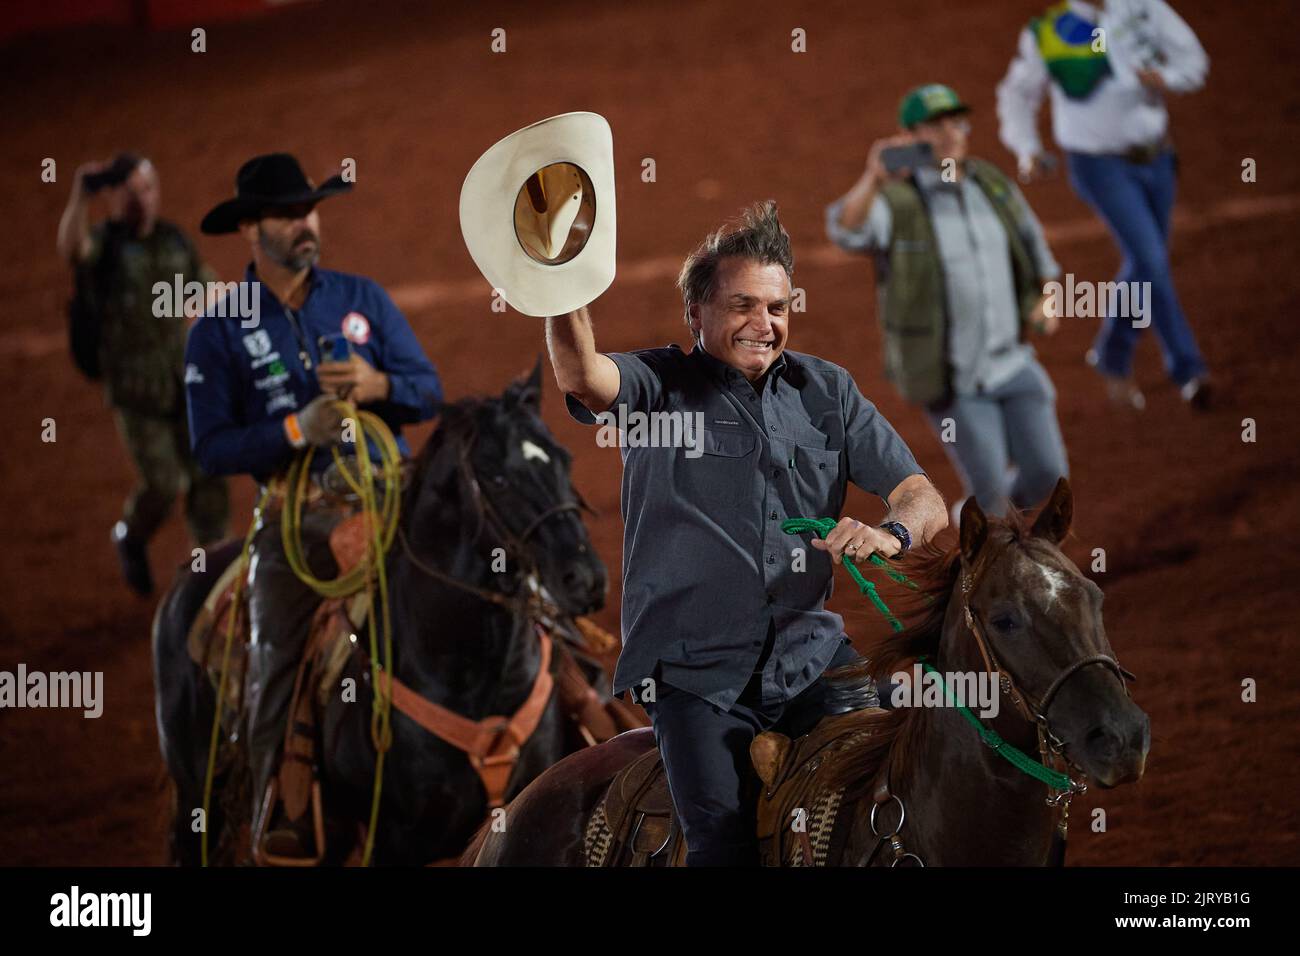 Barretos, Brazil. 26th Aug, 2022. Brazilian president and re-election candidate Jair Bolsonaro rides a horse during the opening of the 28th International Rodeo in Barretos, Sao Paulo, Brazil, on August 26, 2022. (Photo by Igor do Vale/Sipa USA) Credit: Sipa USA/Alamy Live News Stock Photo